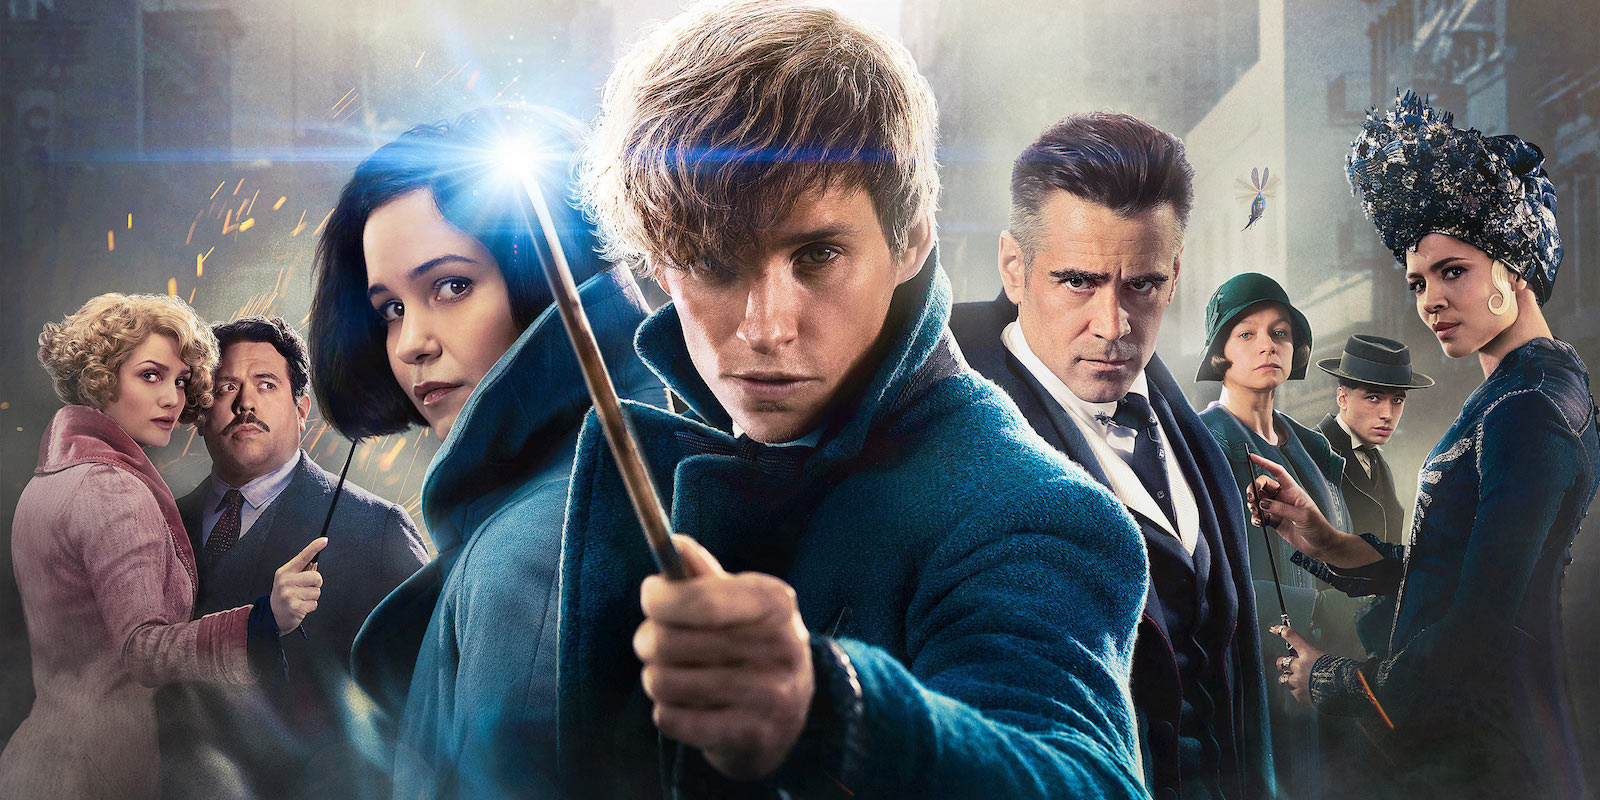 Fantastic Beasts and Where to Find Them Poster Villain